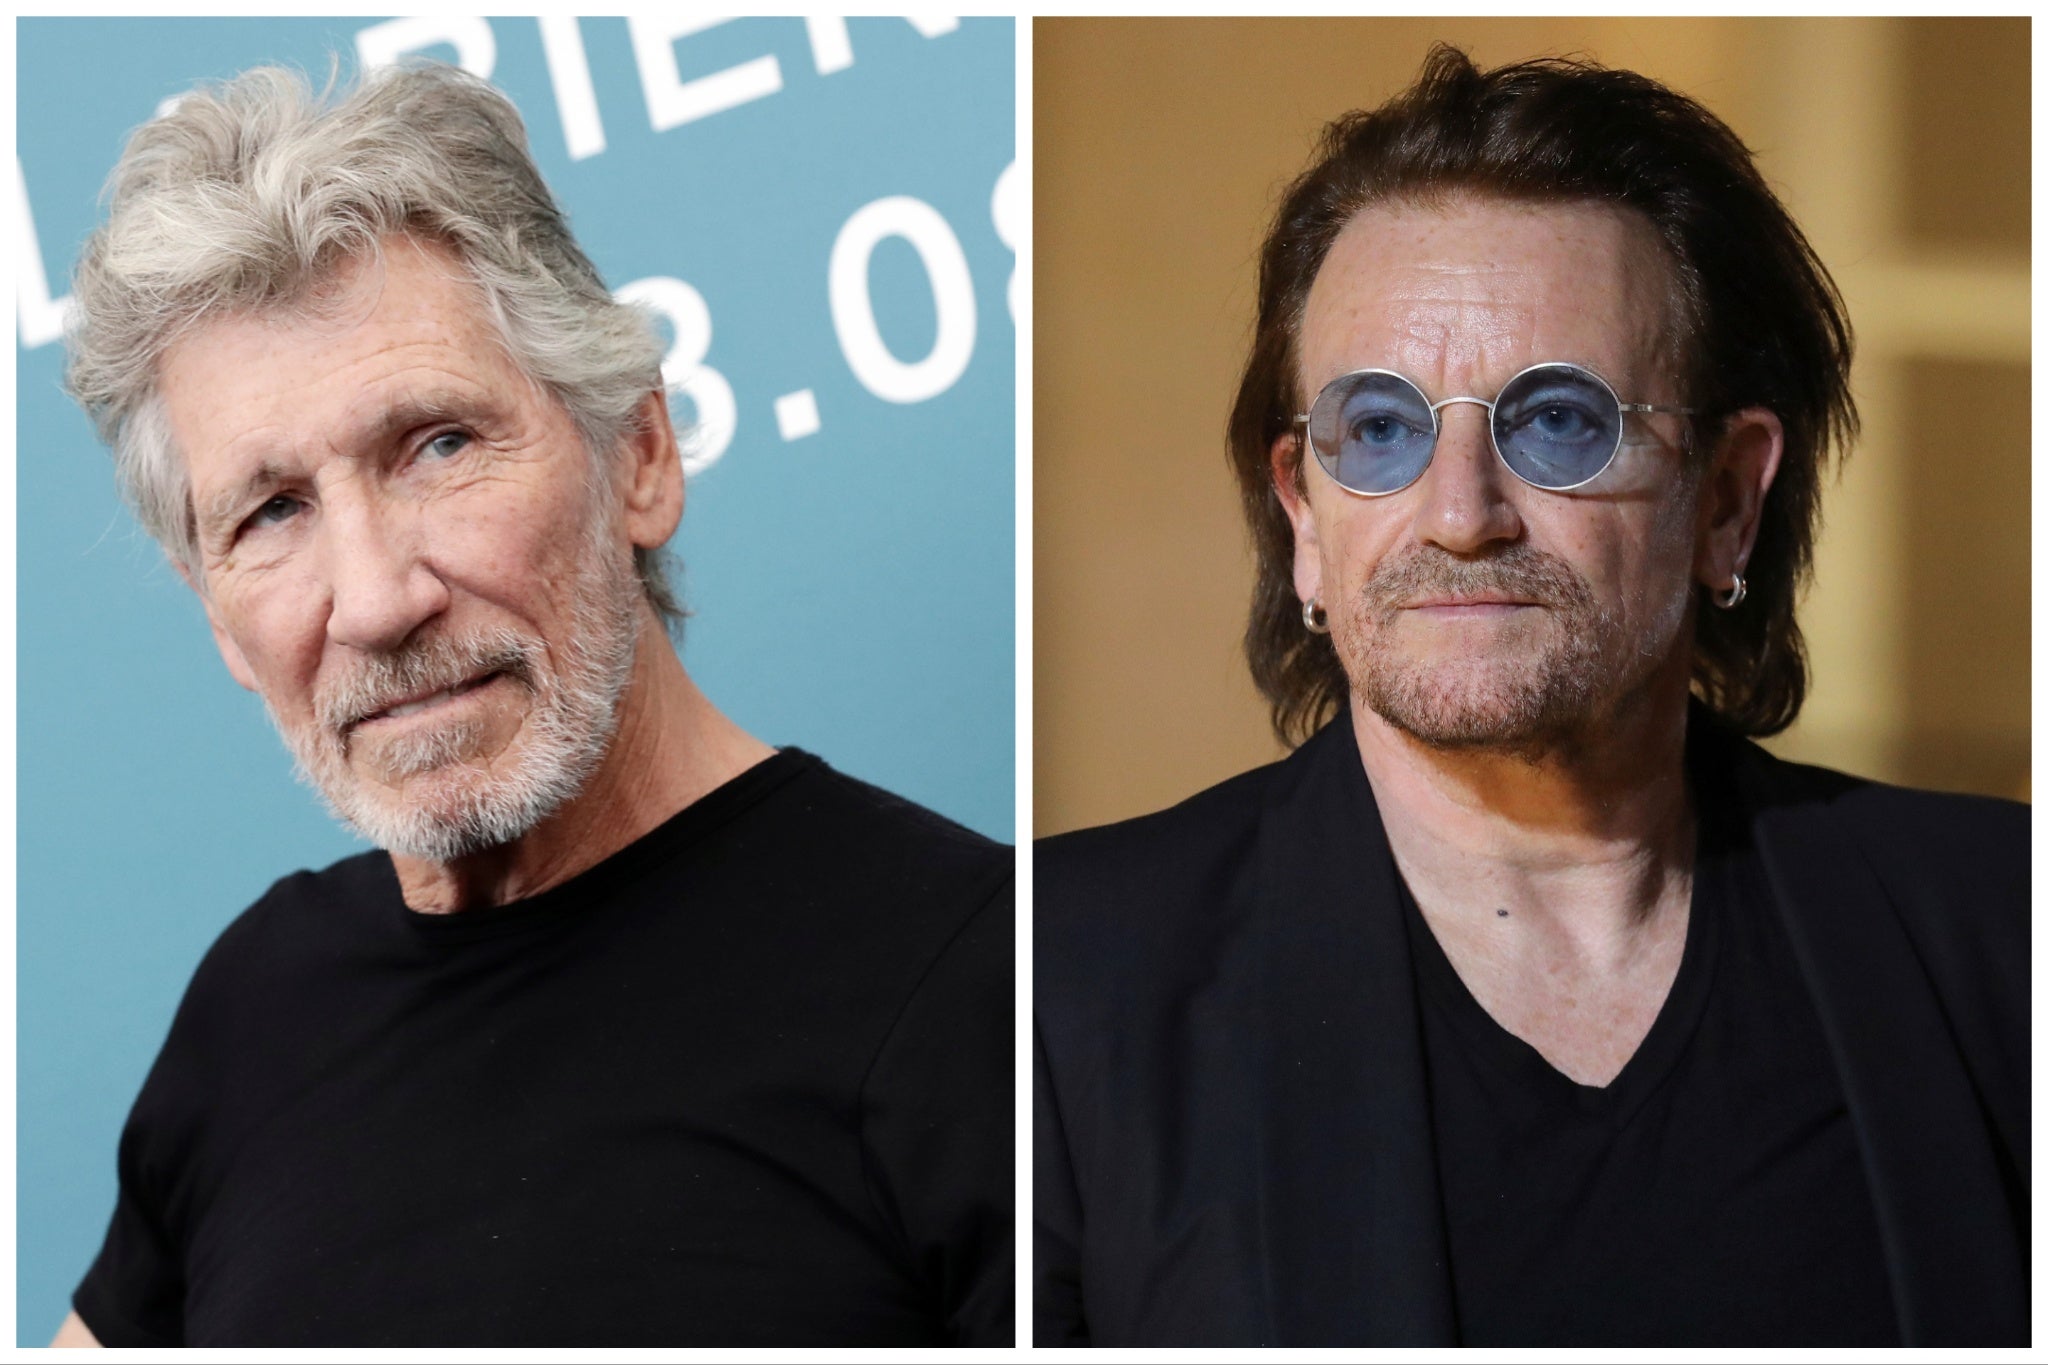 Roger Waters (left) and Bono